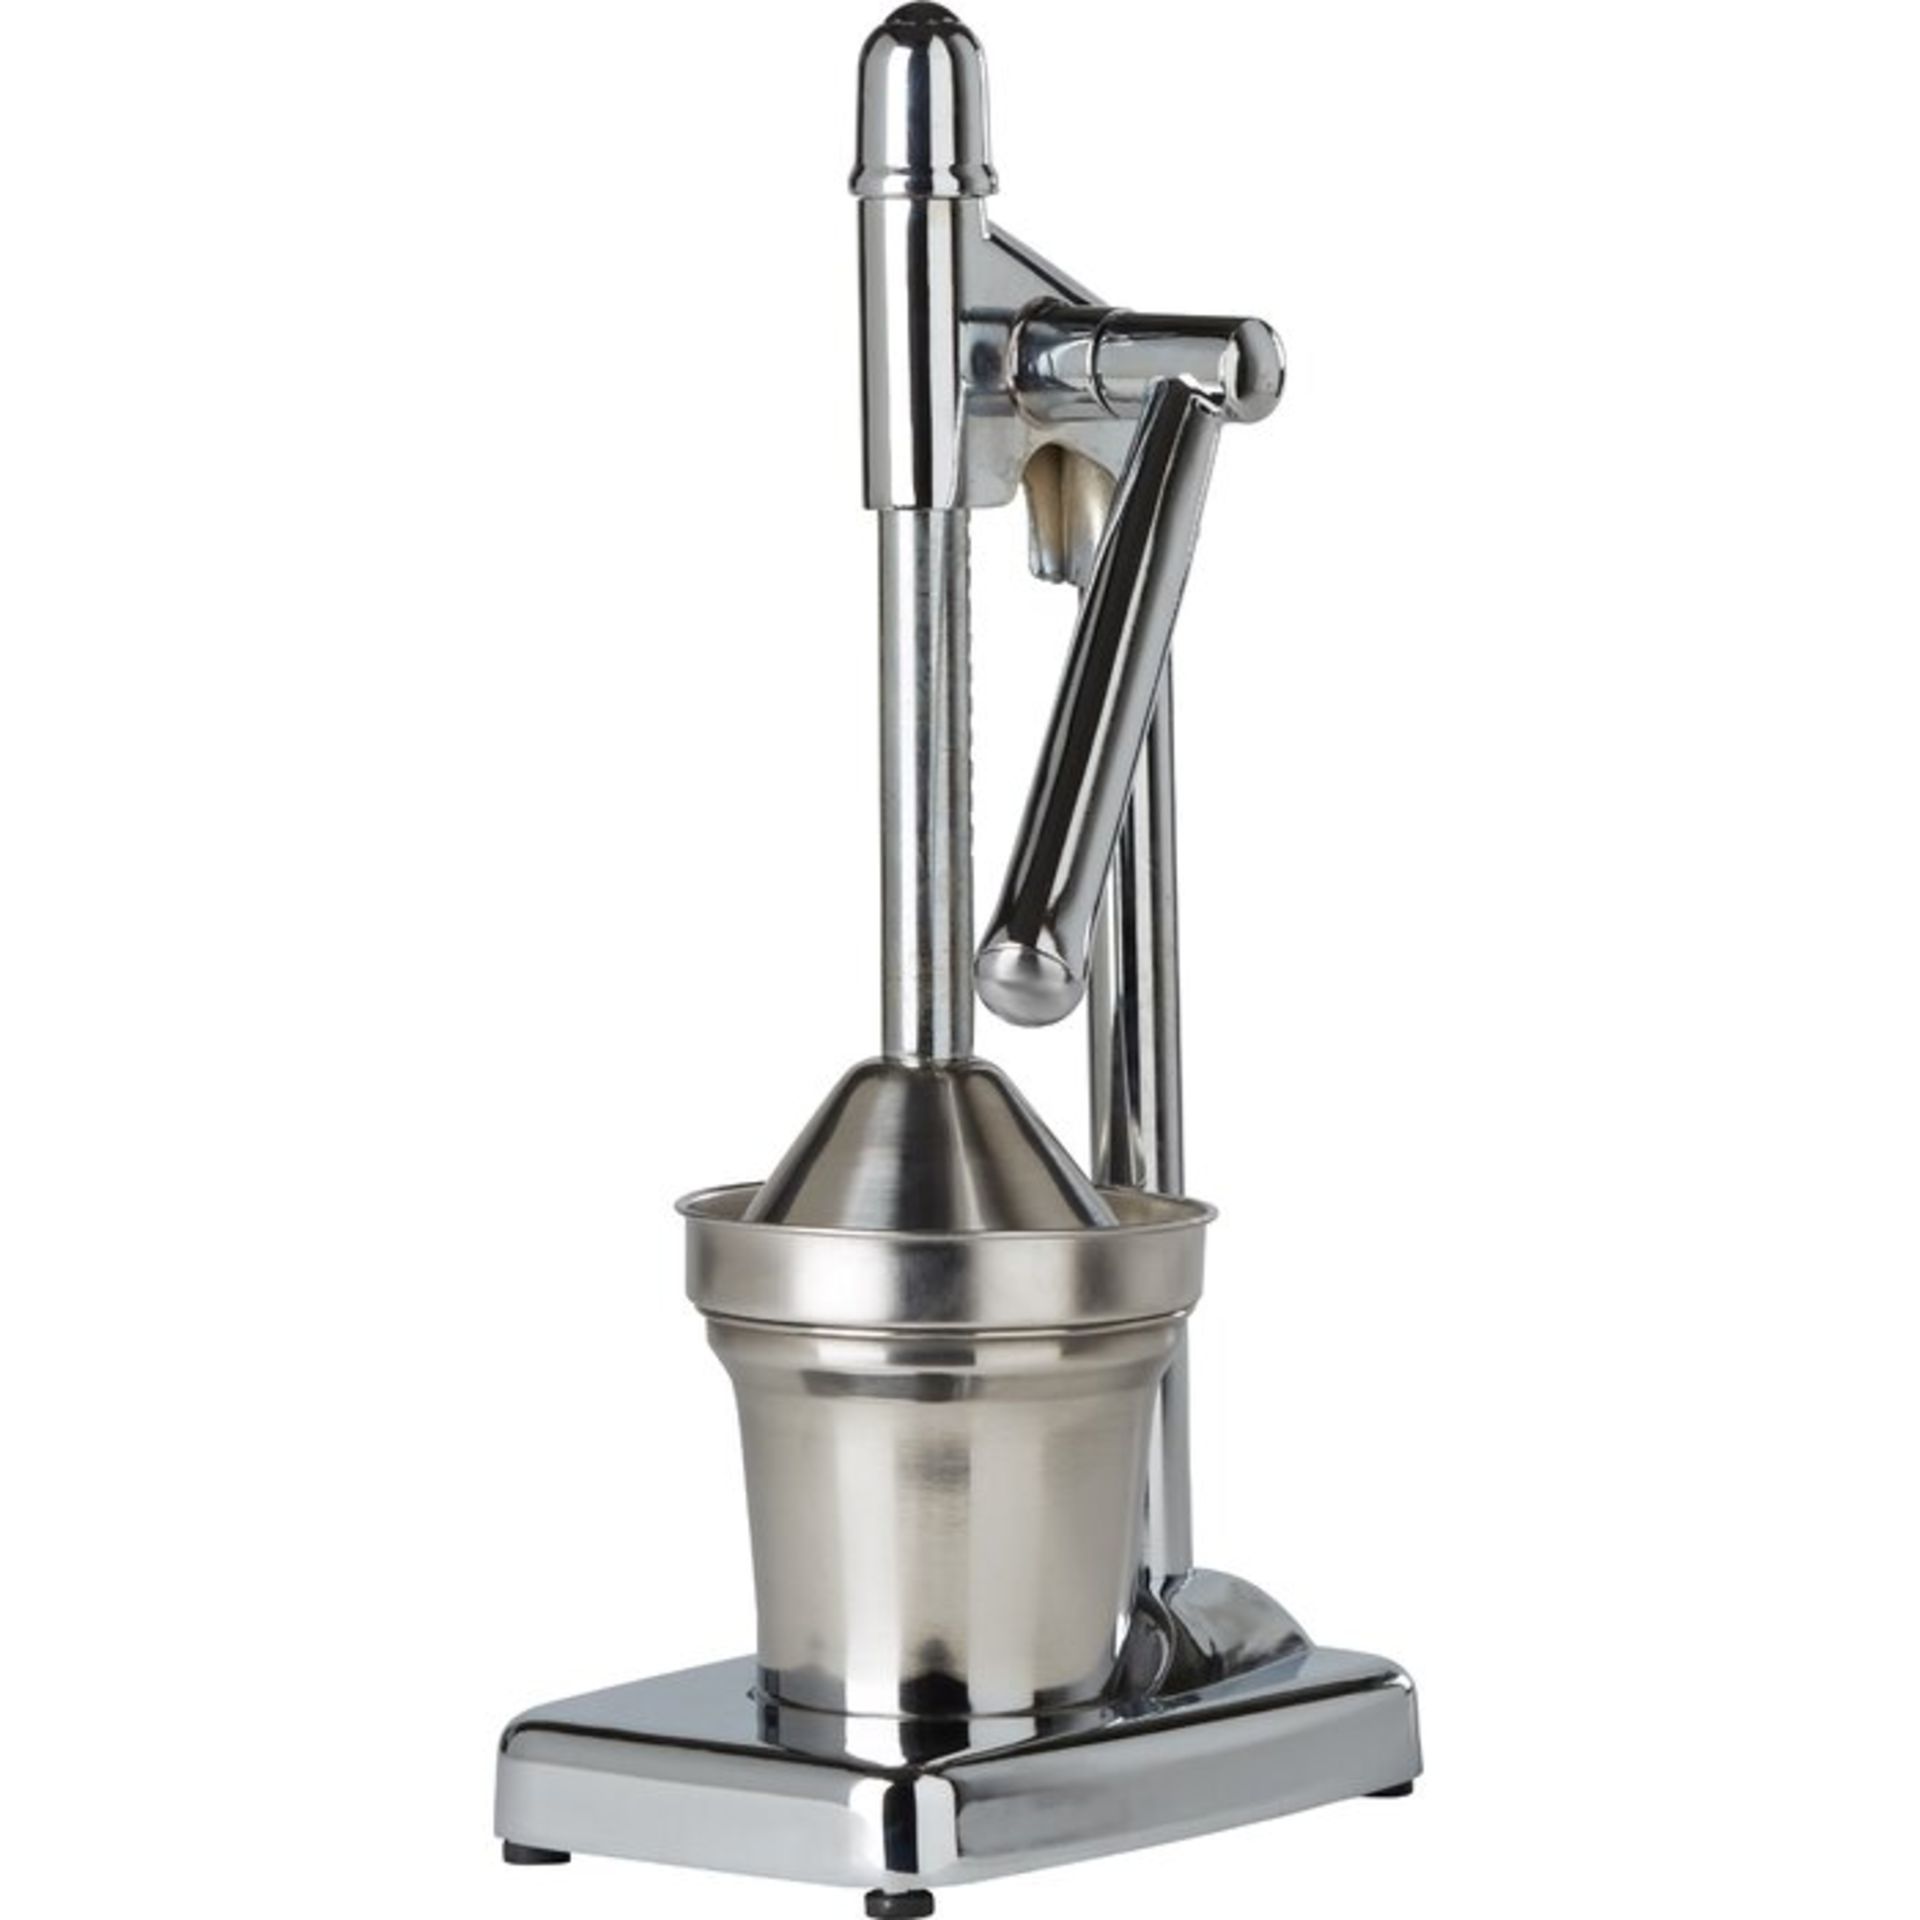 KitchenCraft Deluxe Chrome Plated Lever-Arm Juicer - RRP £34.99